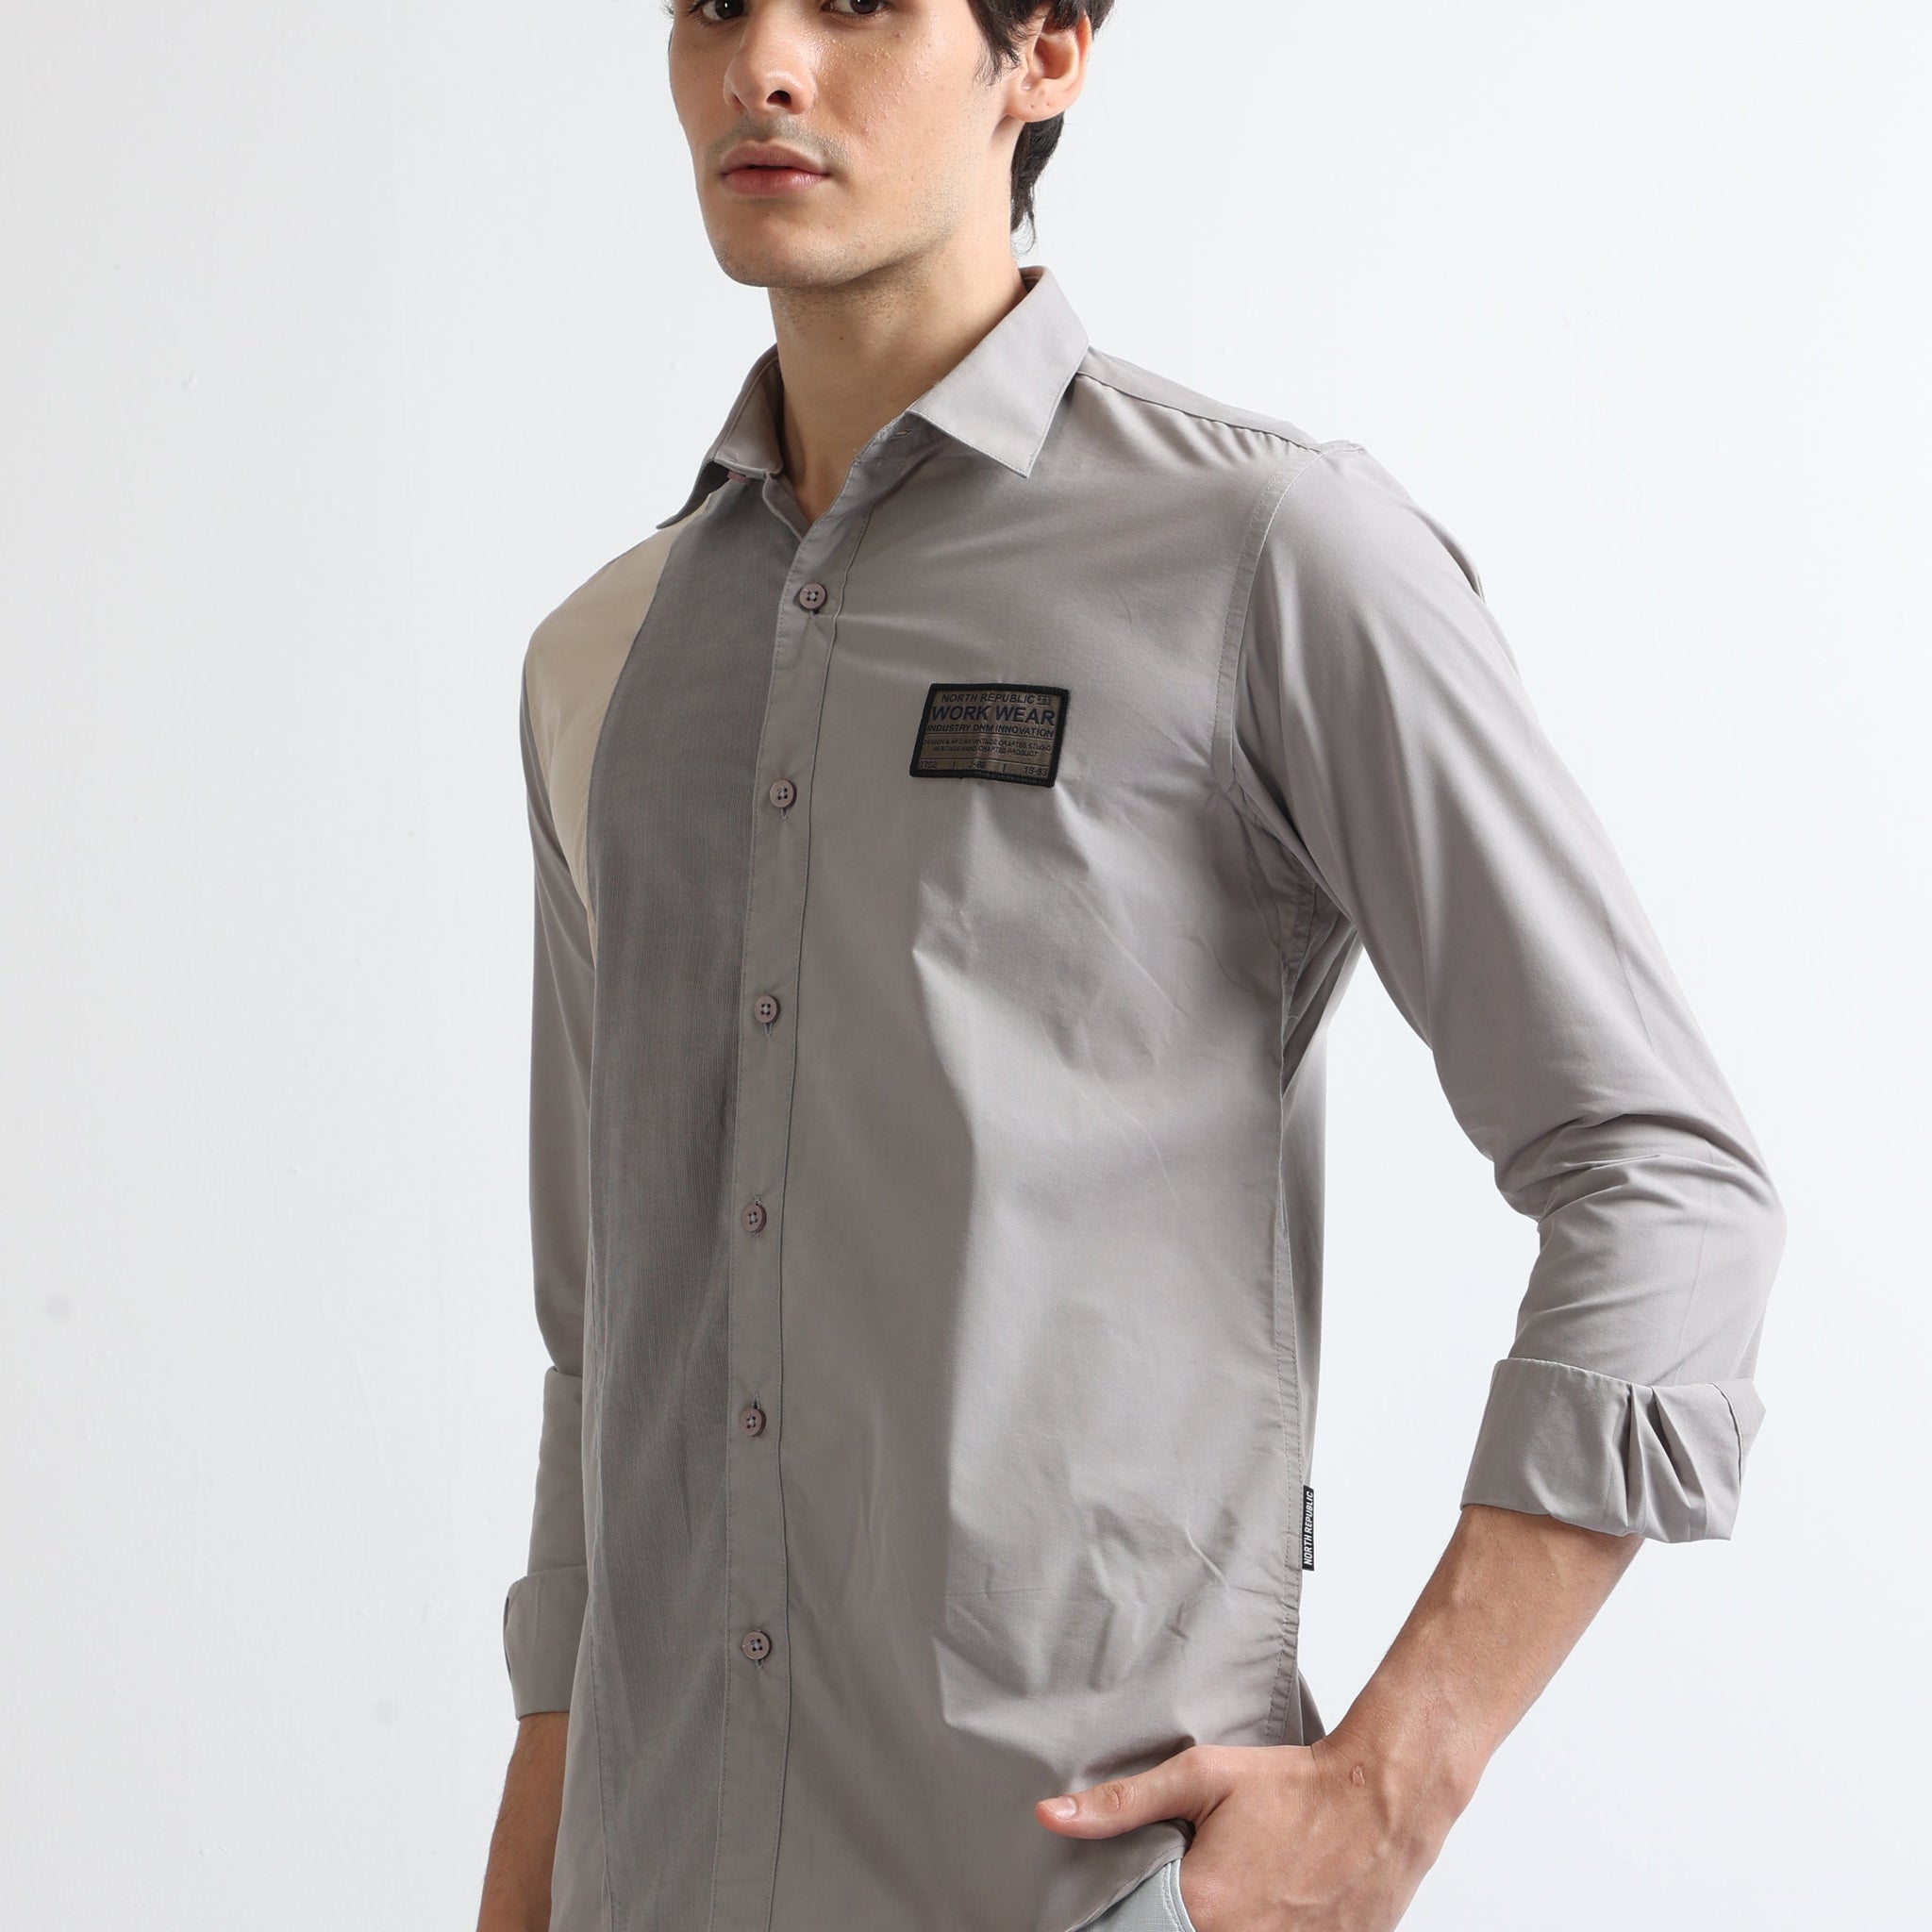 Buy Smart Casual Panel Shirt For Work Wear Online